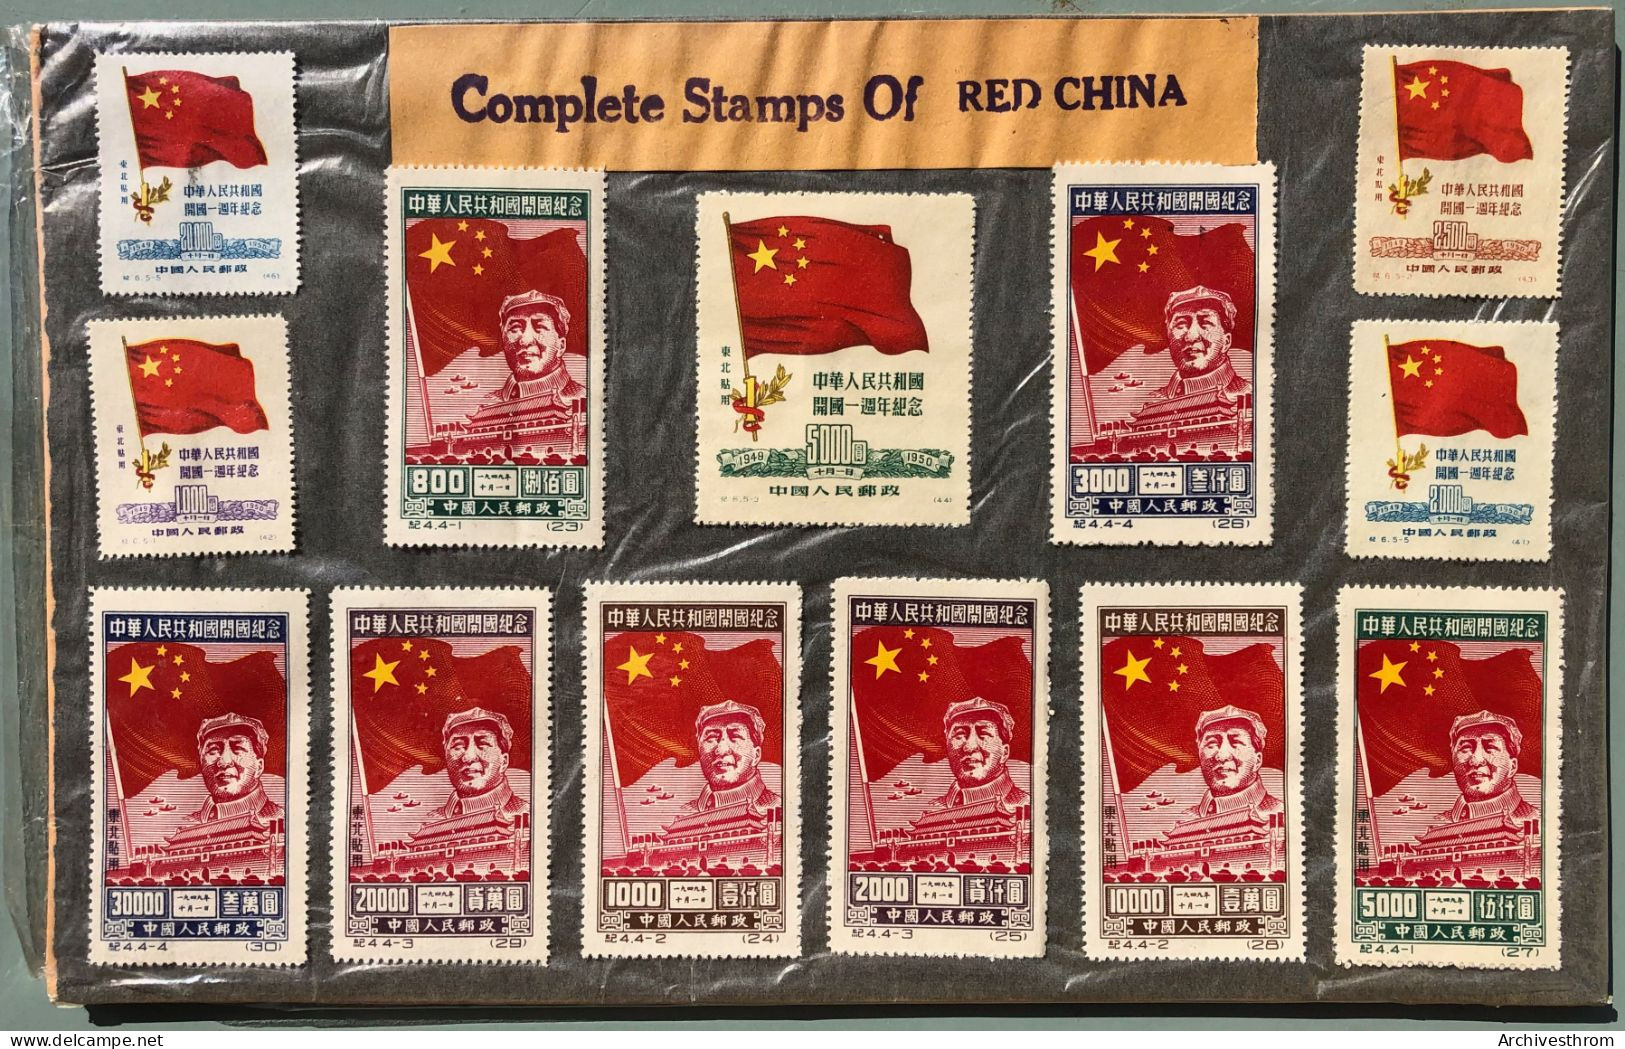 Complete Stamps Of Red China Under Cellophane - Neufs